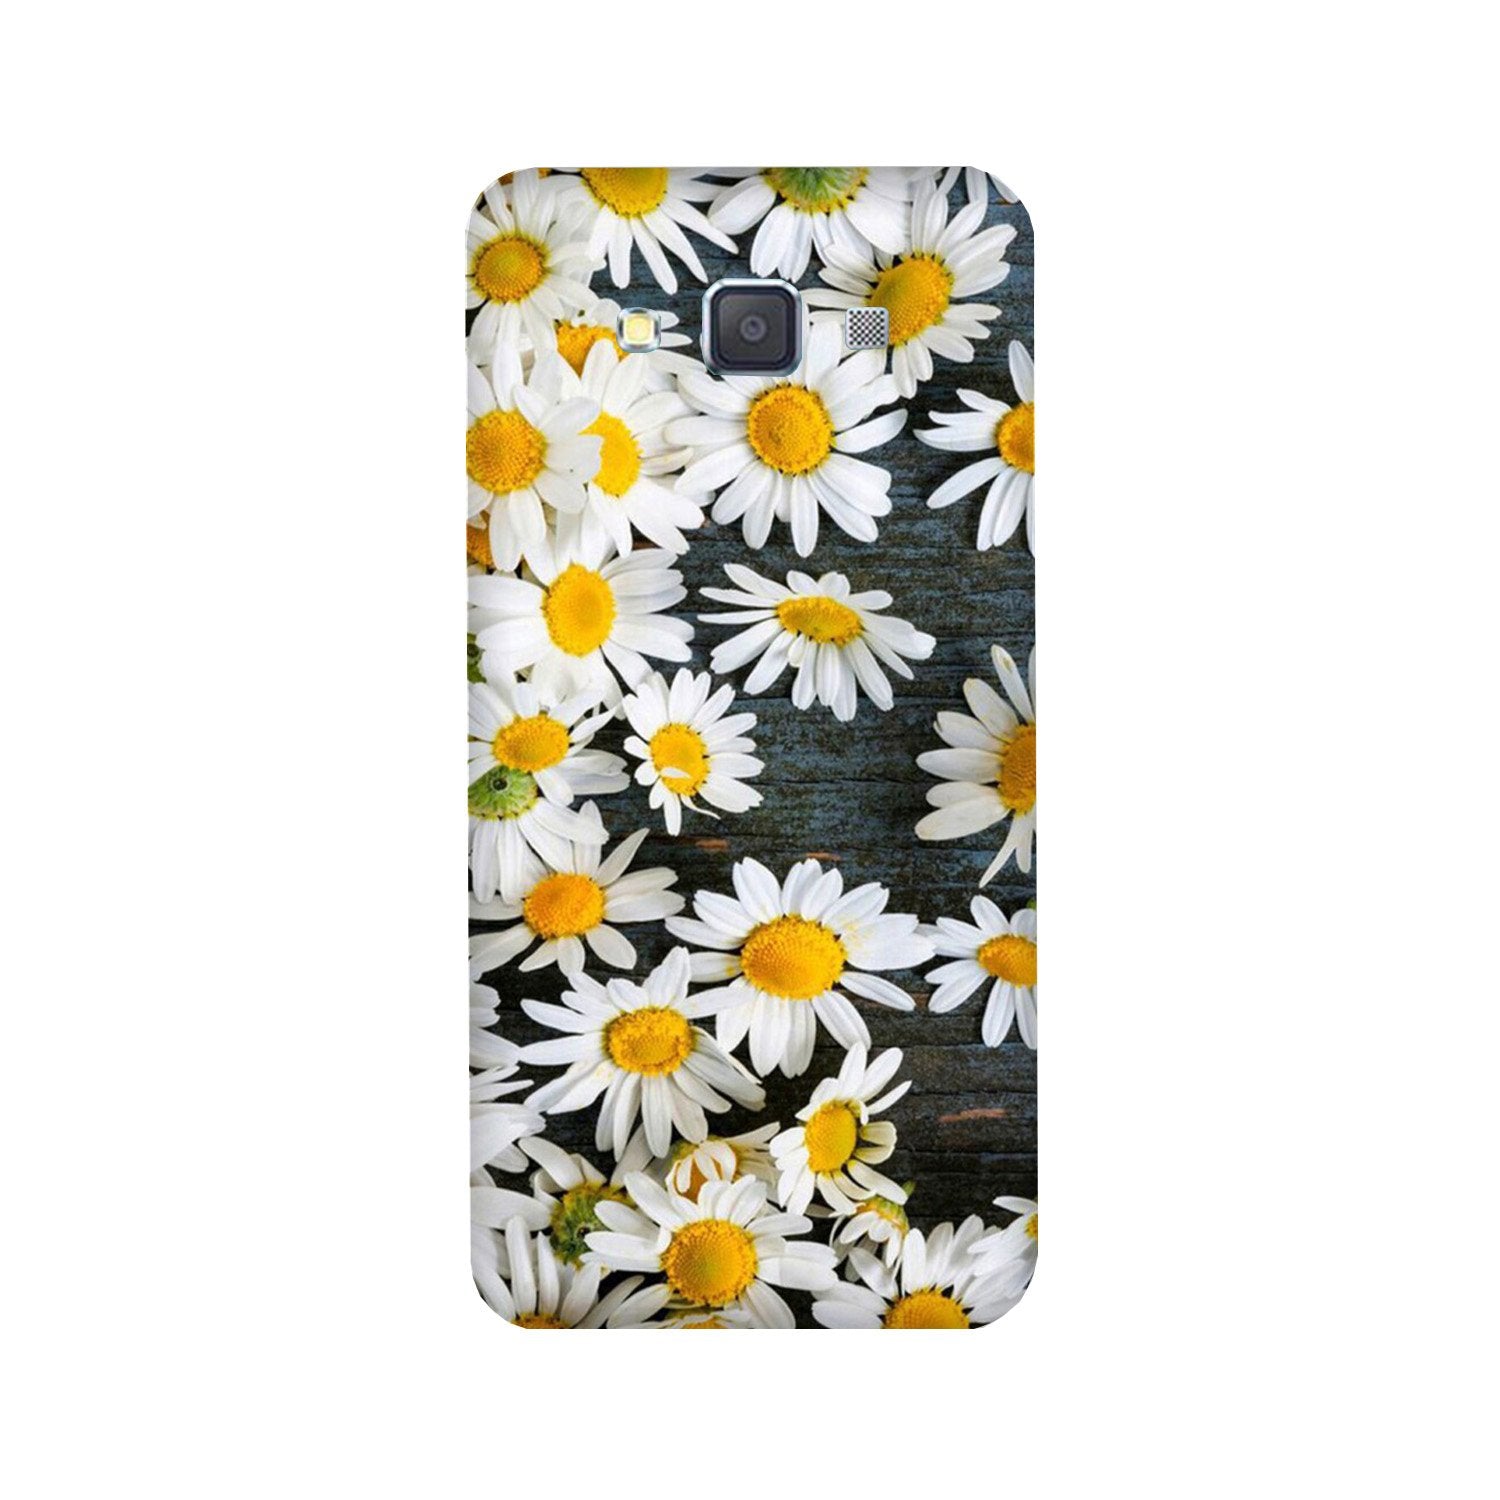 White flowers2 Case for Galaxy J7 (2016)